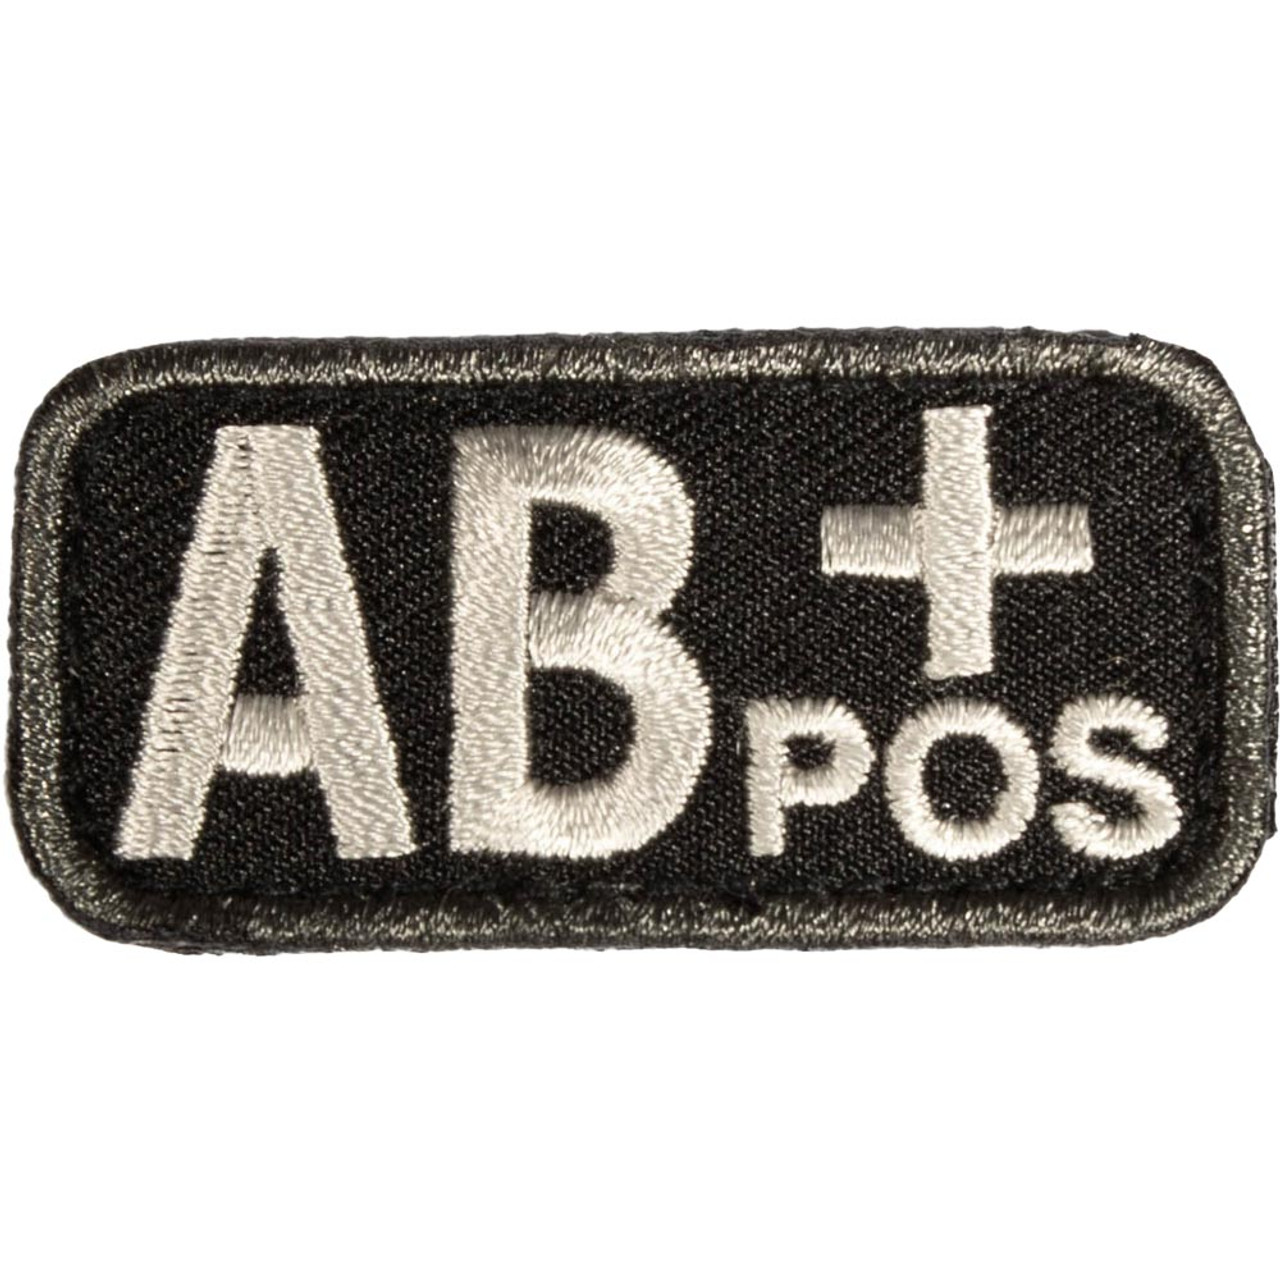 BLOOD TYPE PATCH